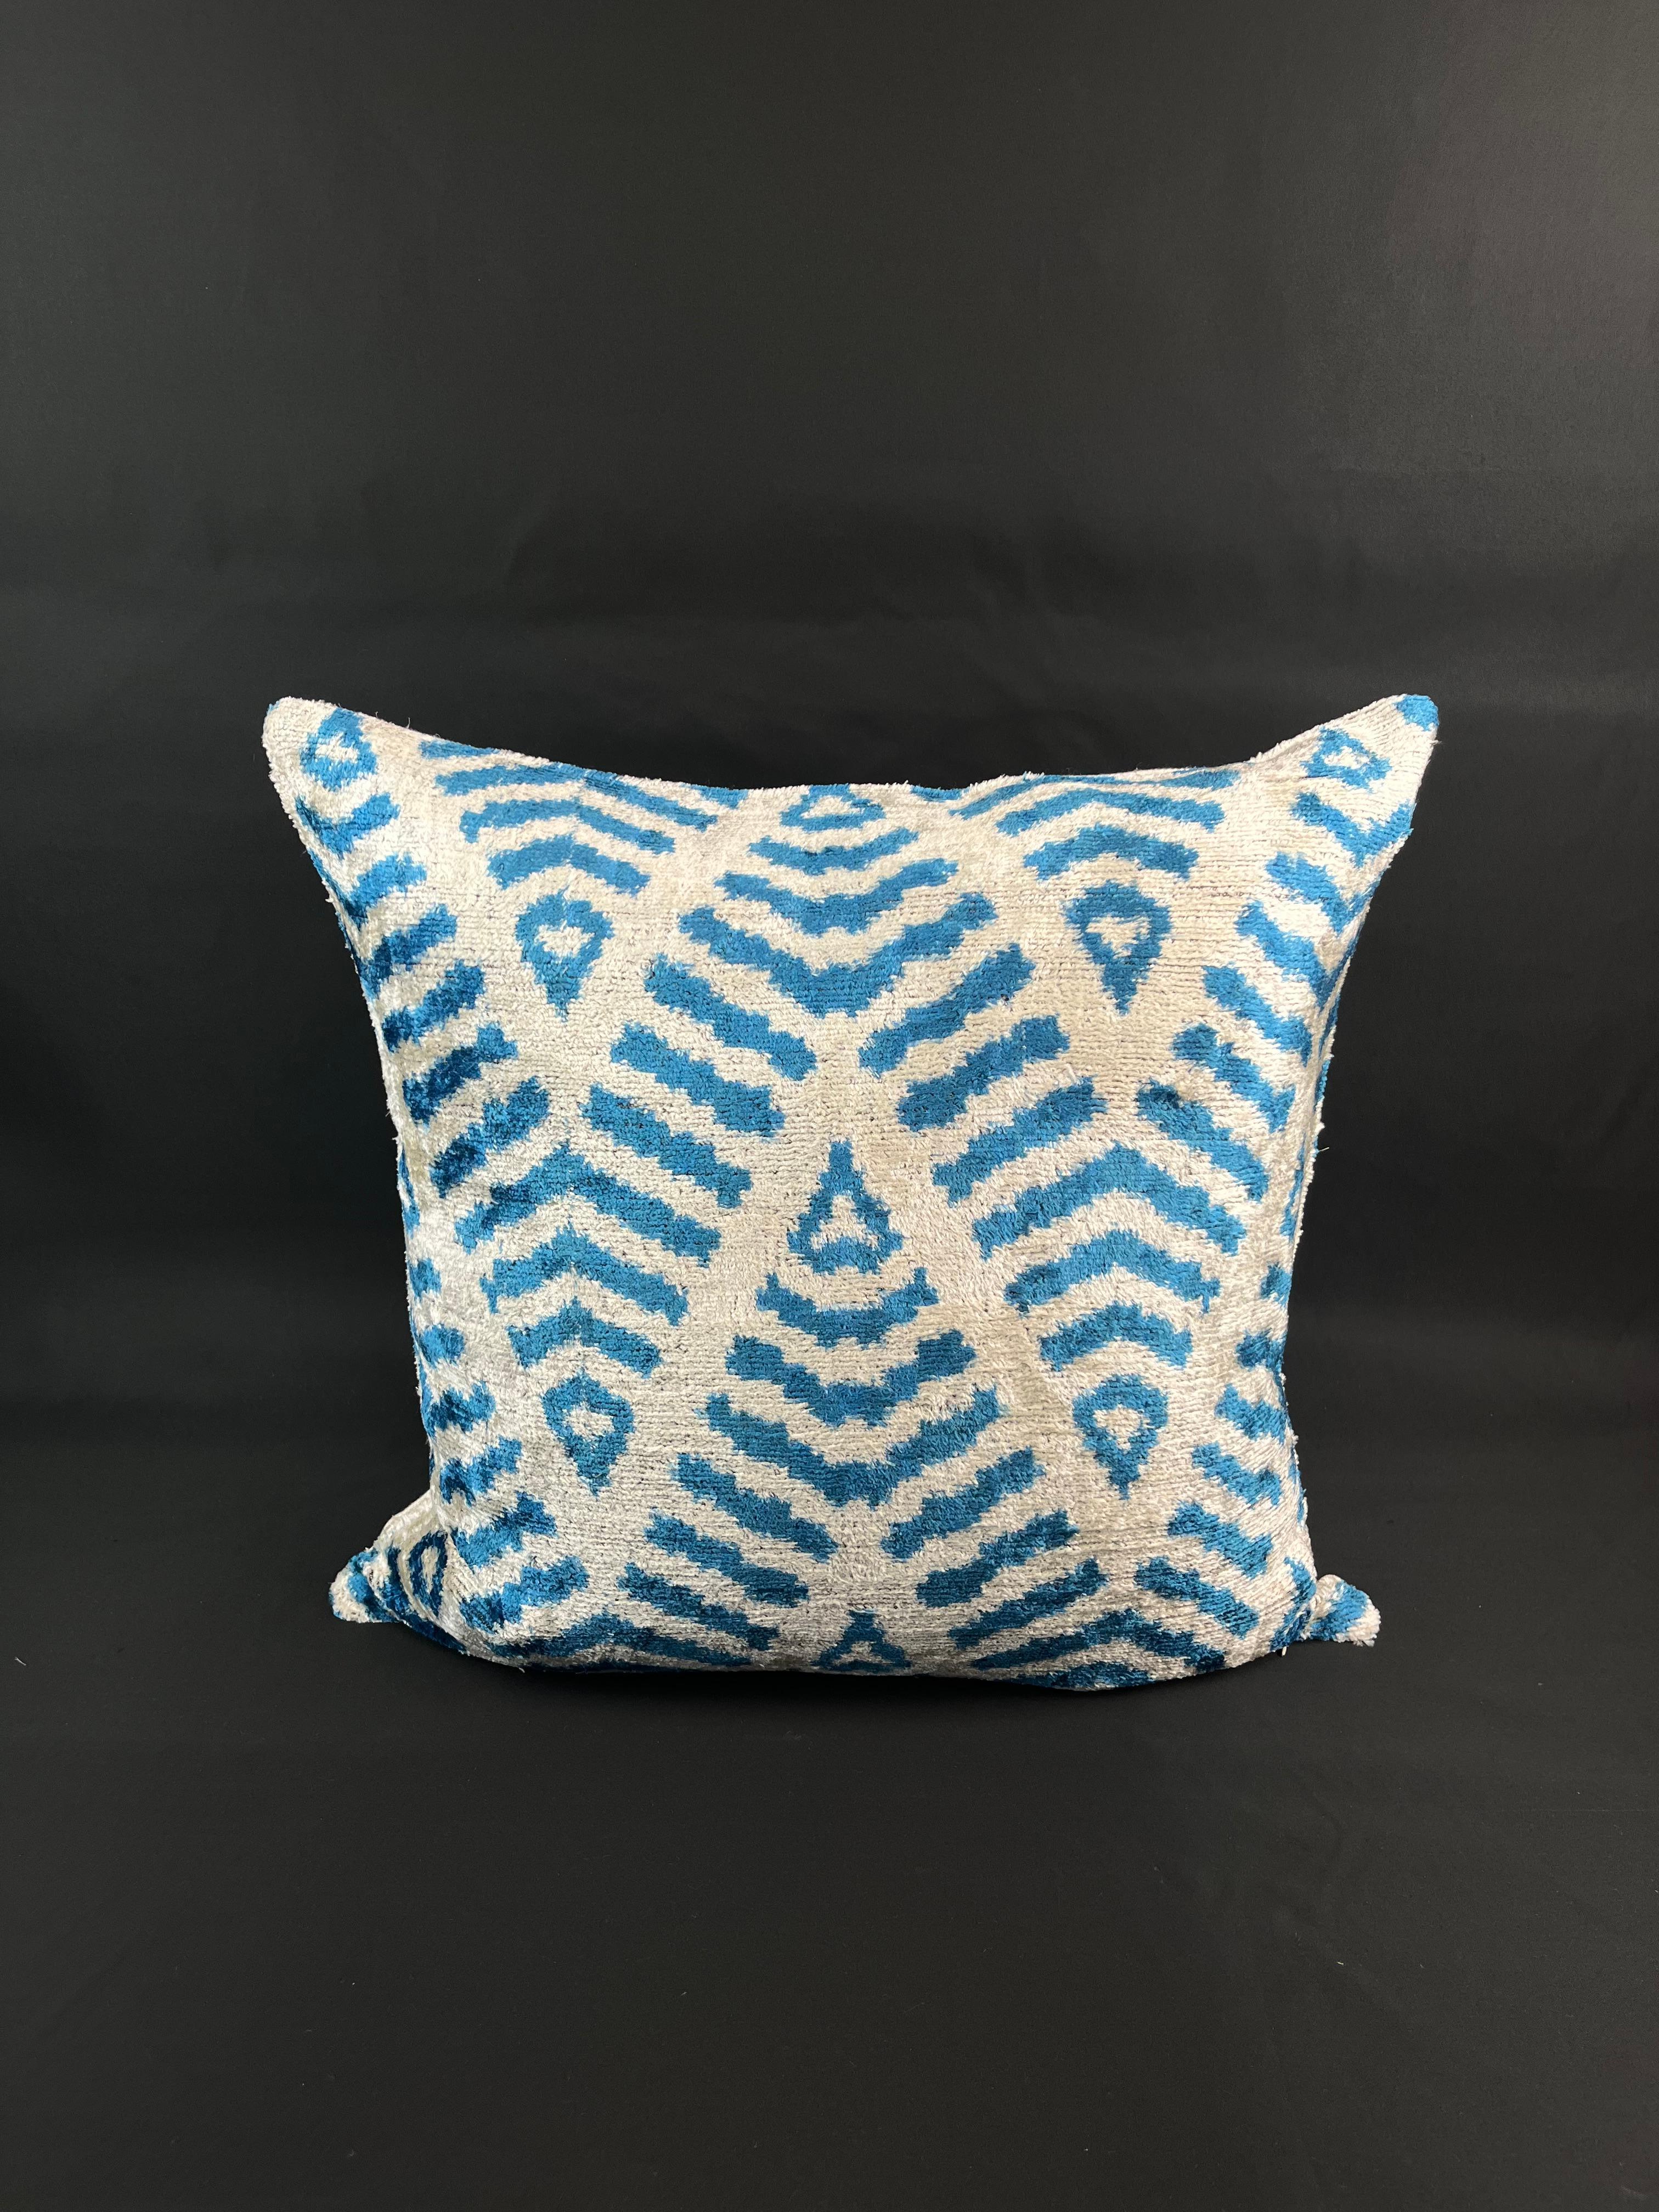 Blue and White Velvet Silk Ikat Pillow Cover In New Condition For Sale In Houston, TX